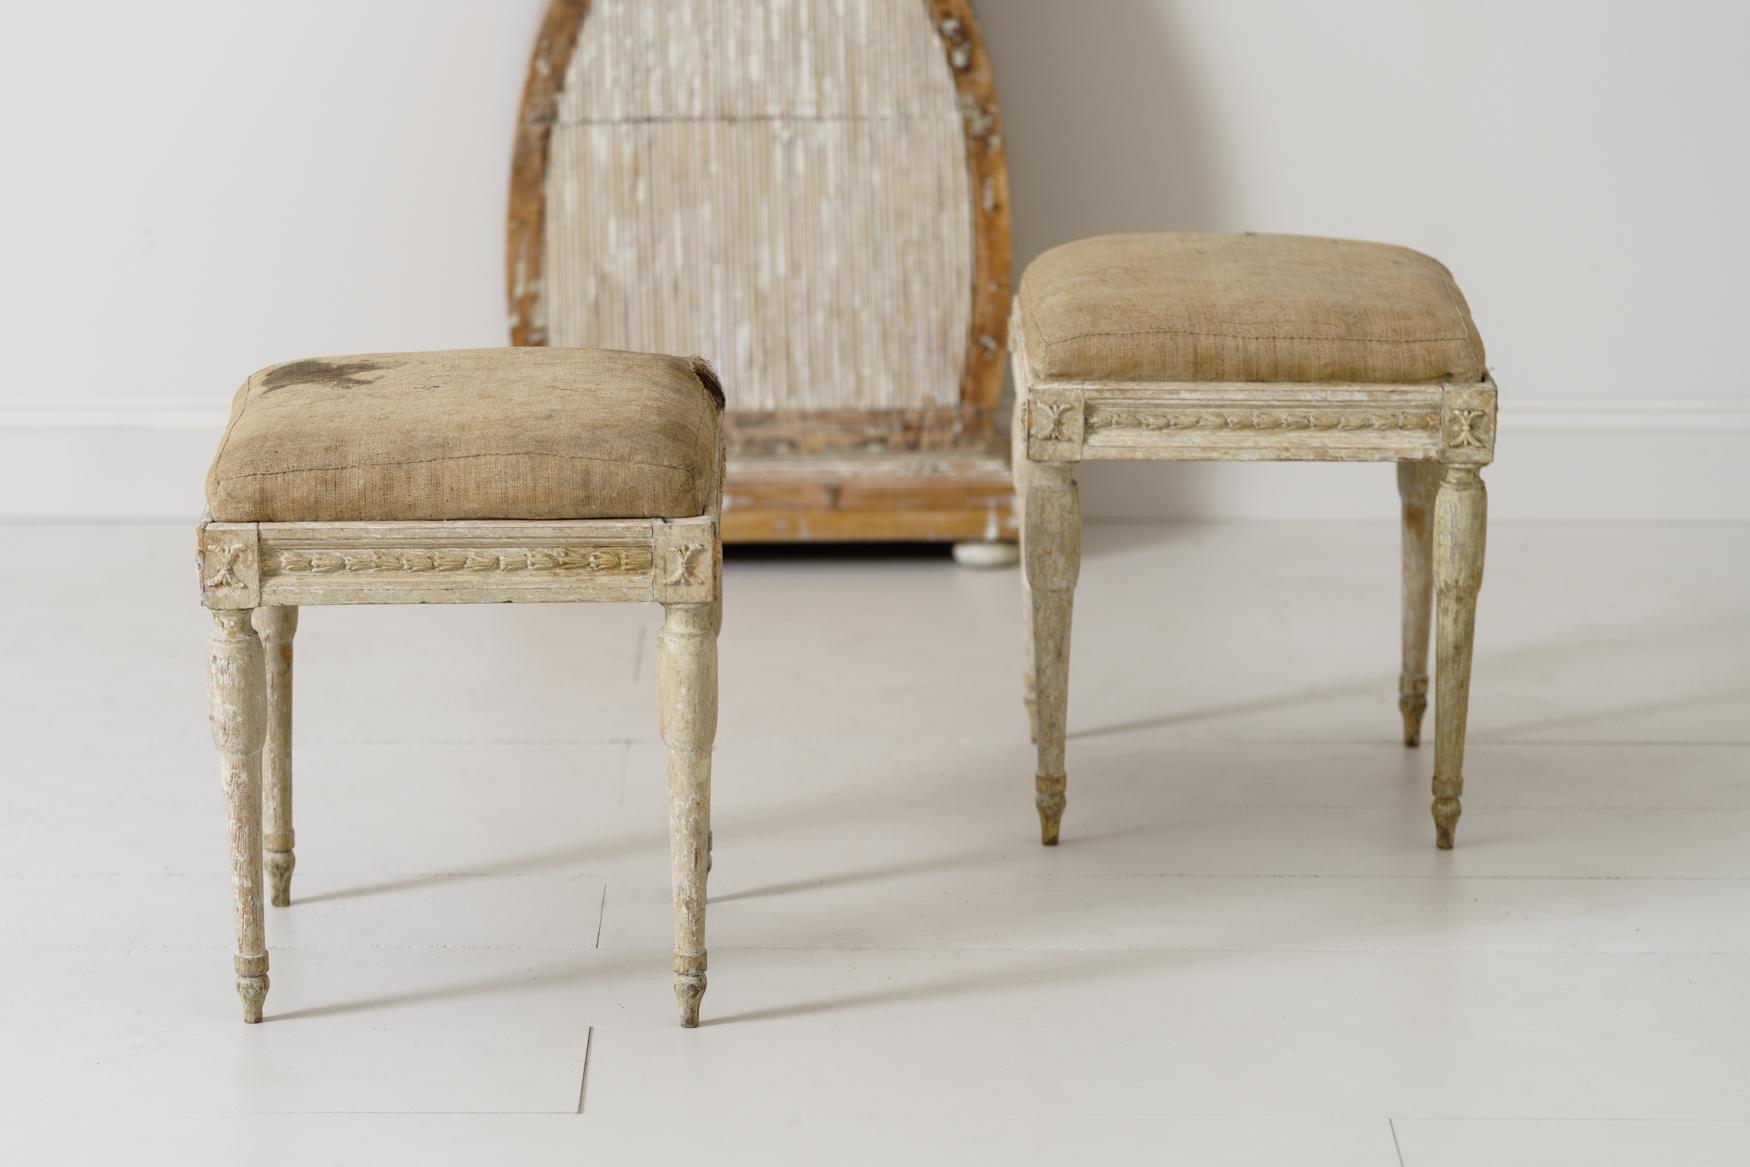 Hand-Crafted 19th Century Swedish Gustavian Period Provincial Stools